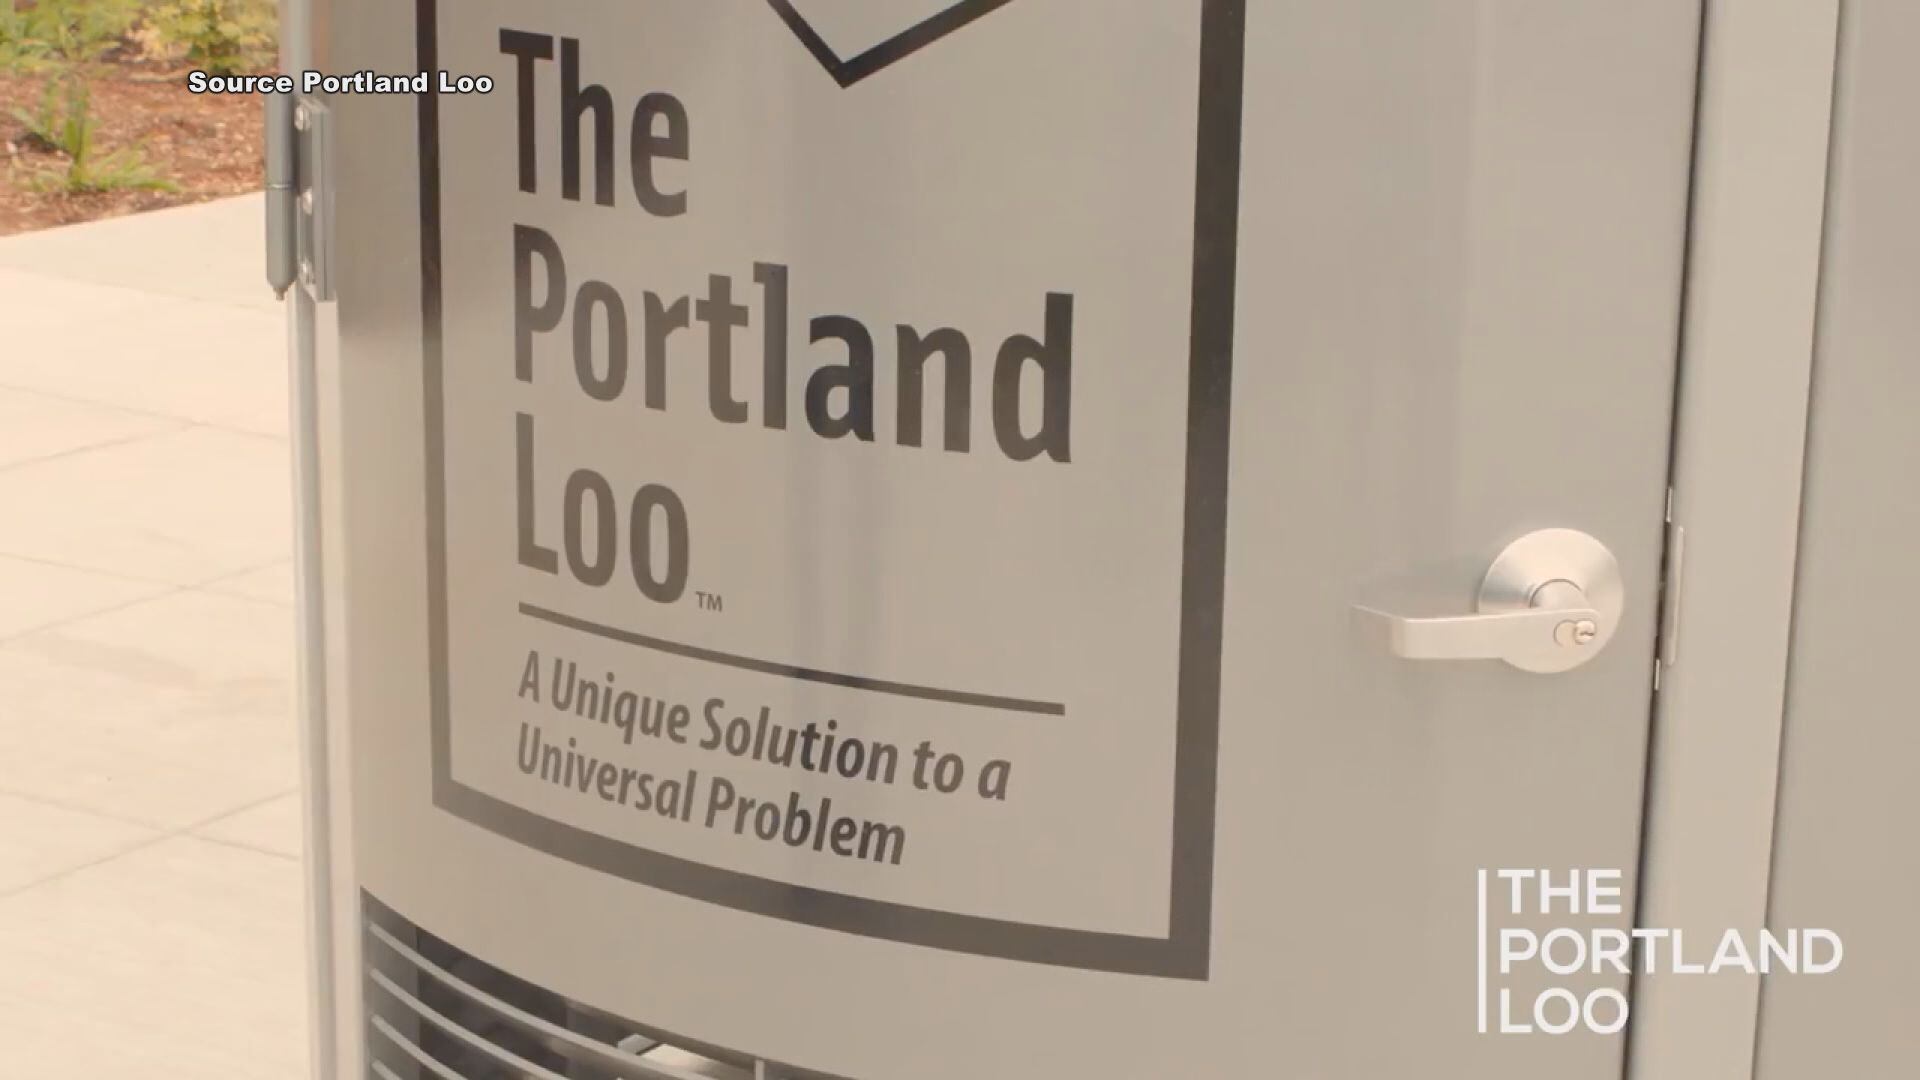 Anchorage is considering purchasing Portland Loo bathrooms for the city (courtesy Portland Loo)